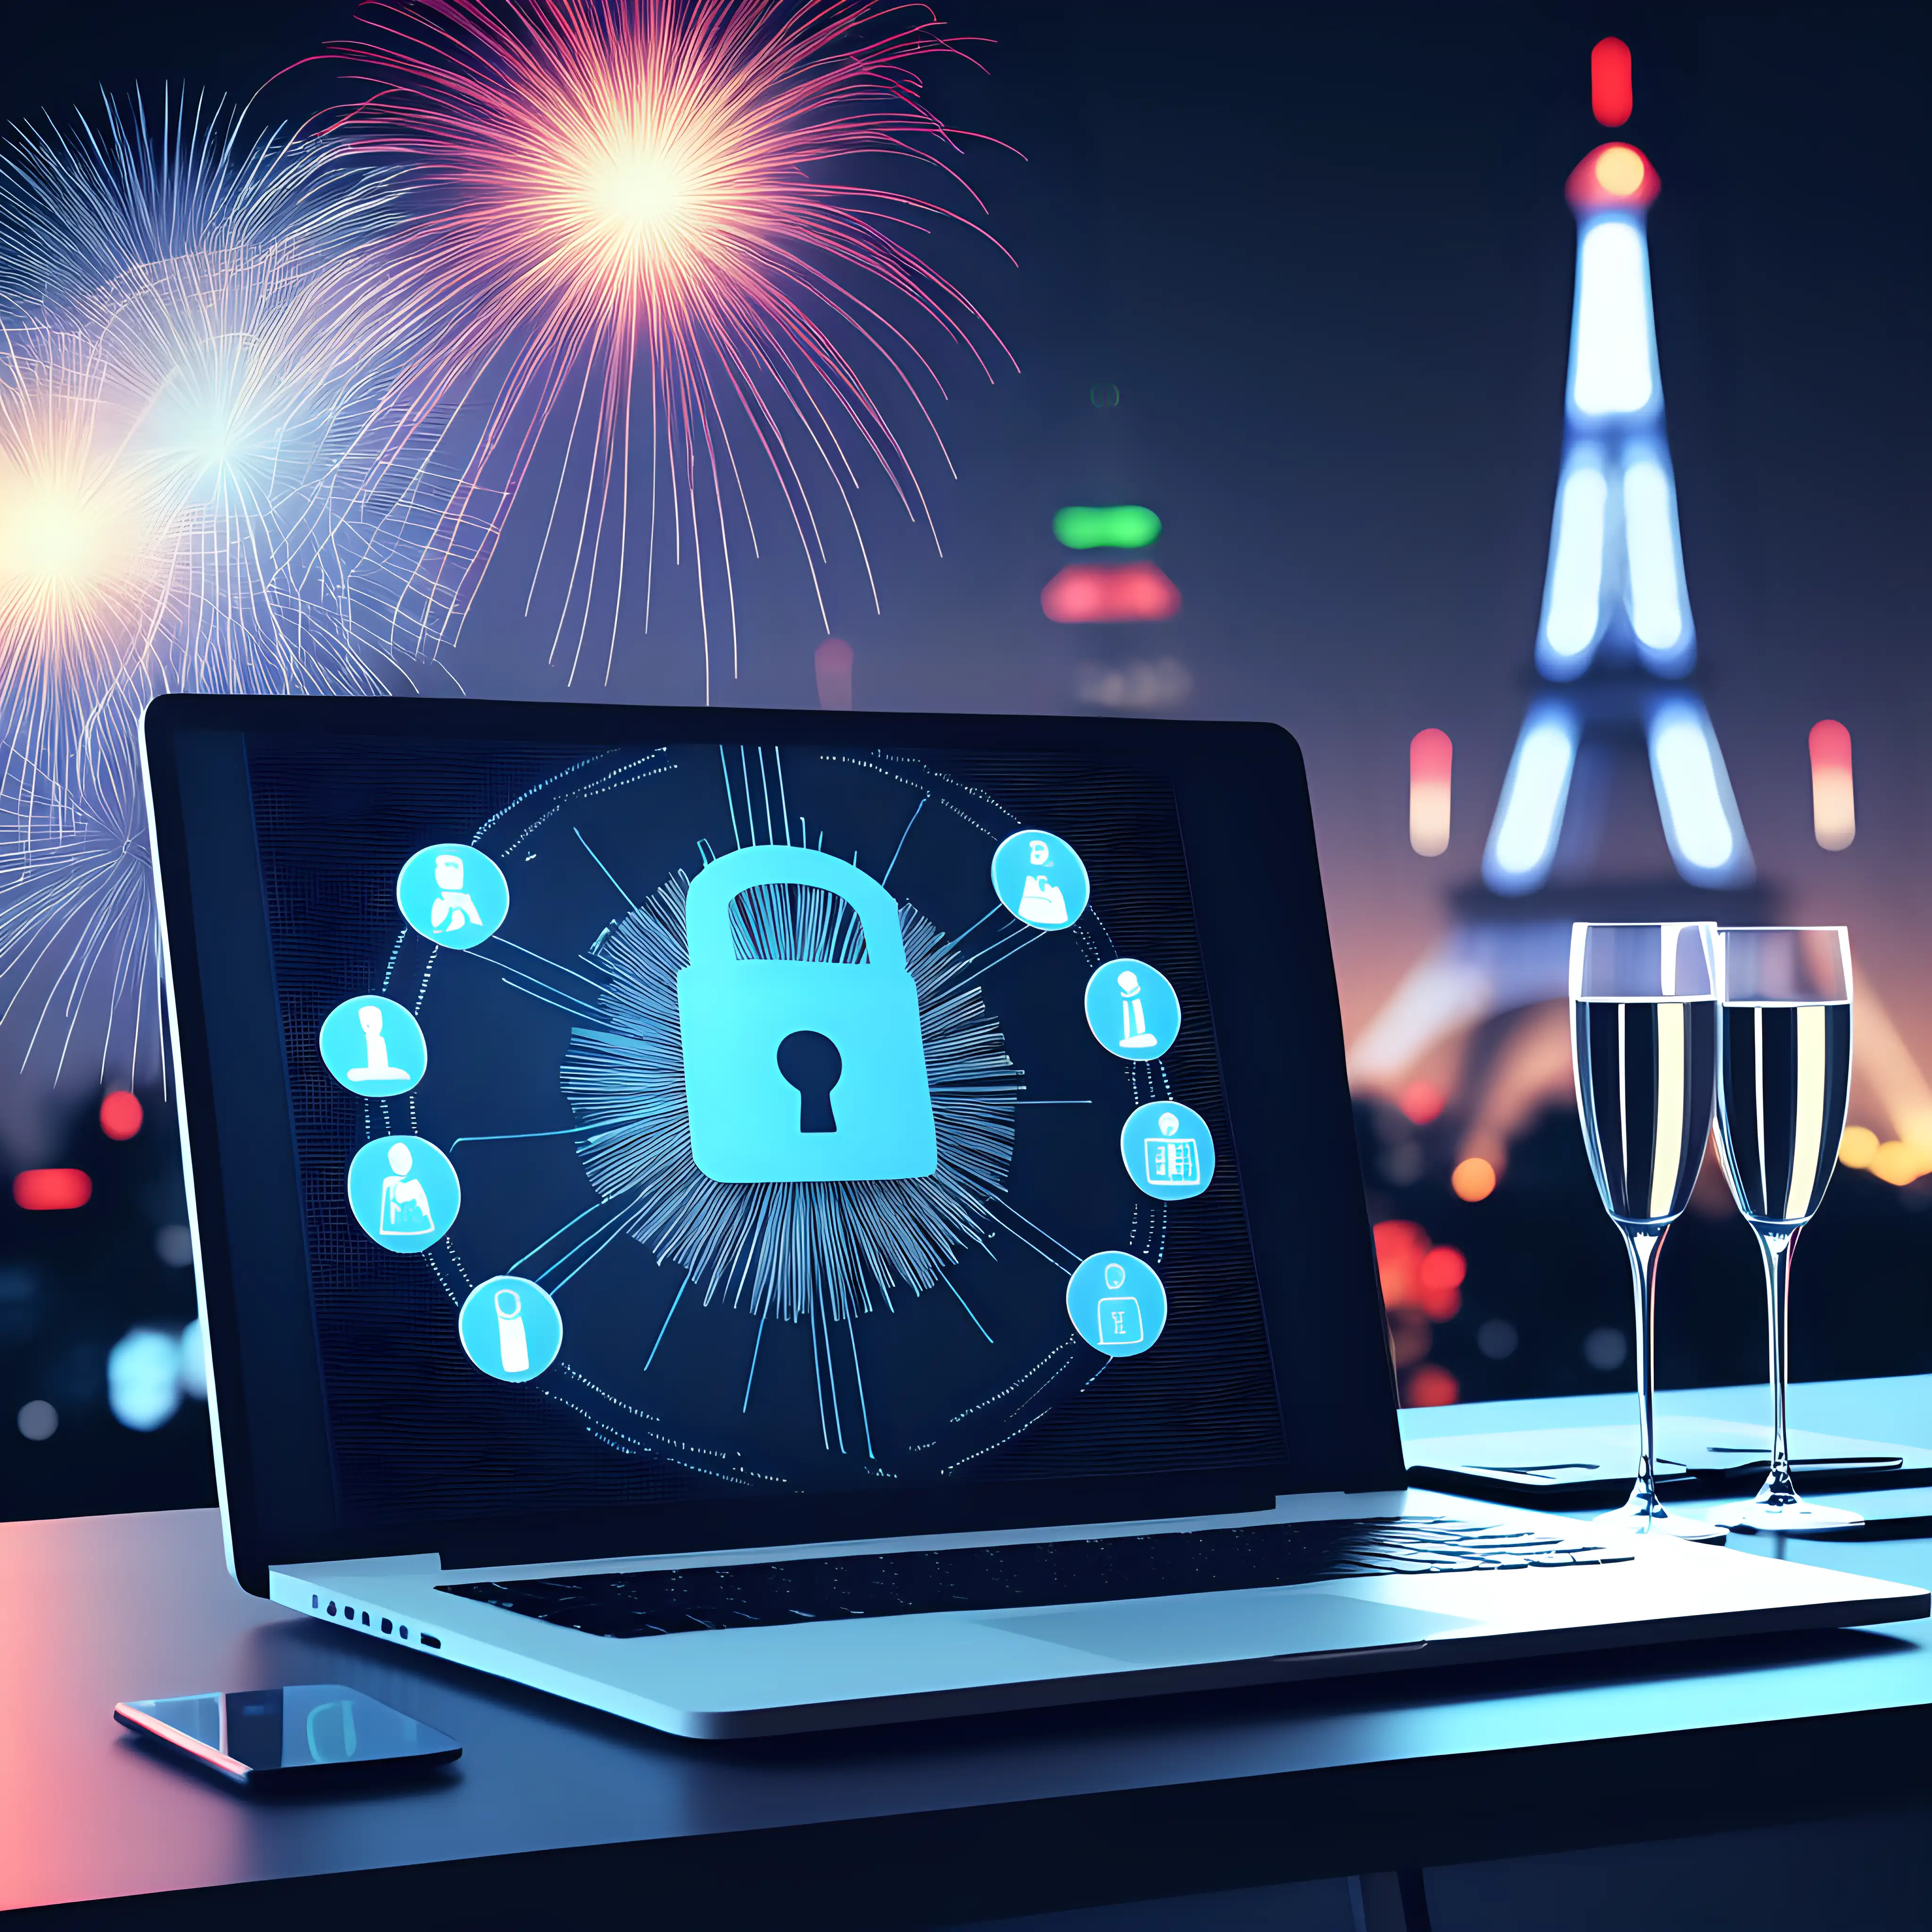 Celebrating Cyber Security on New Years Eve Digital Vigilance in Festive Times